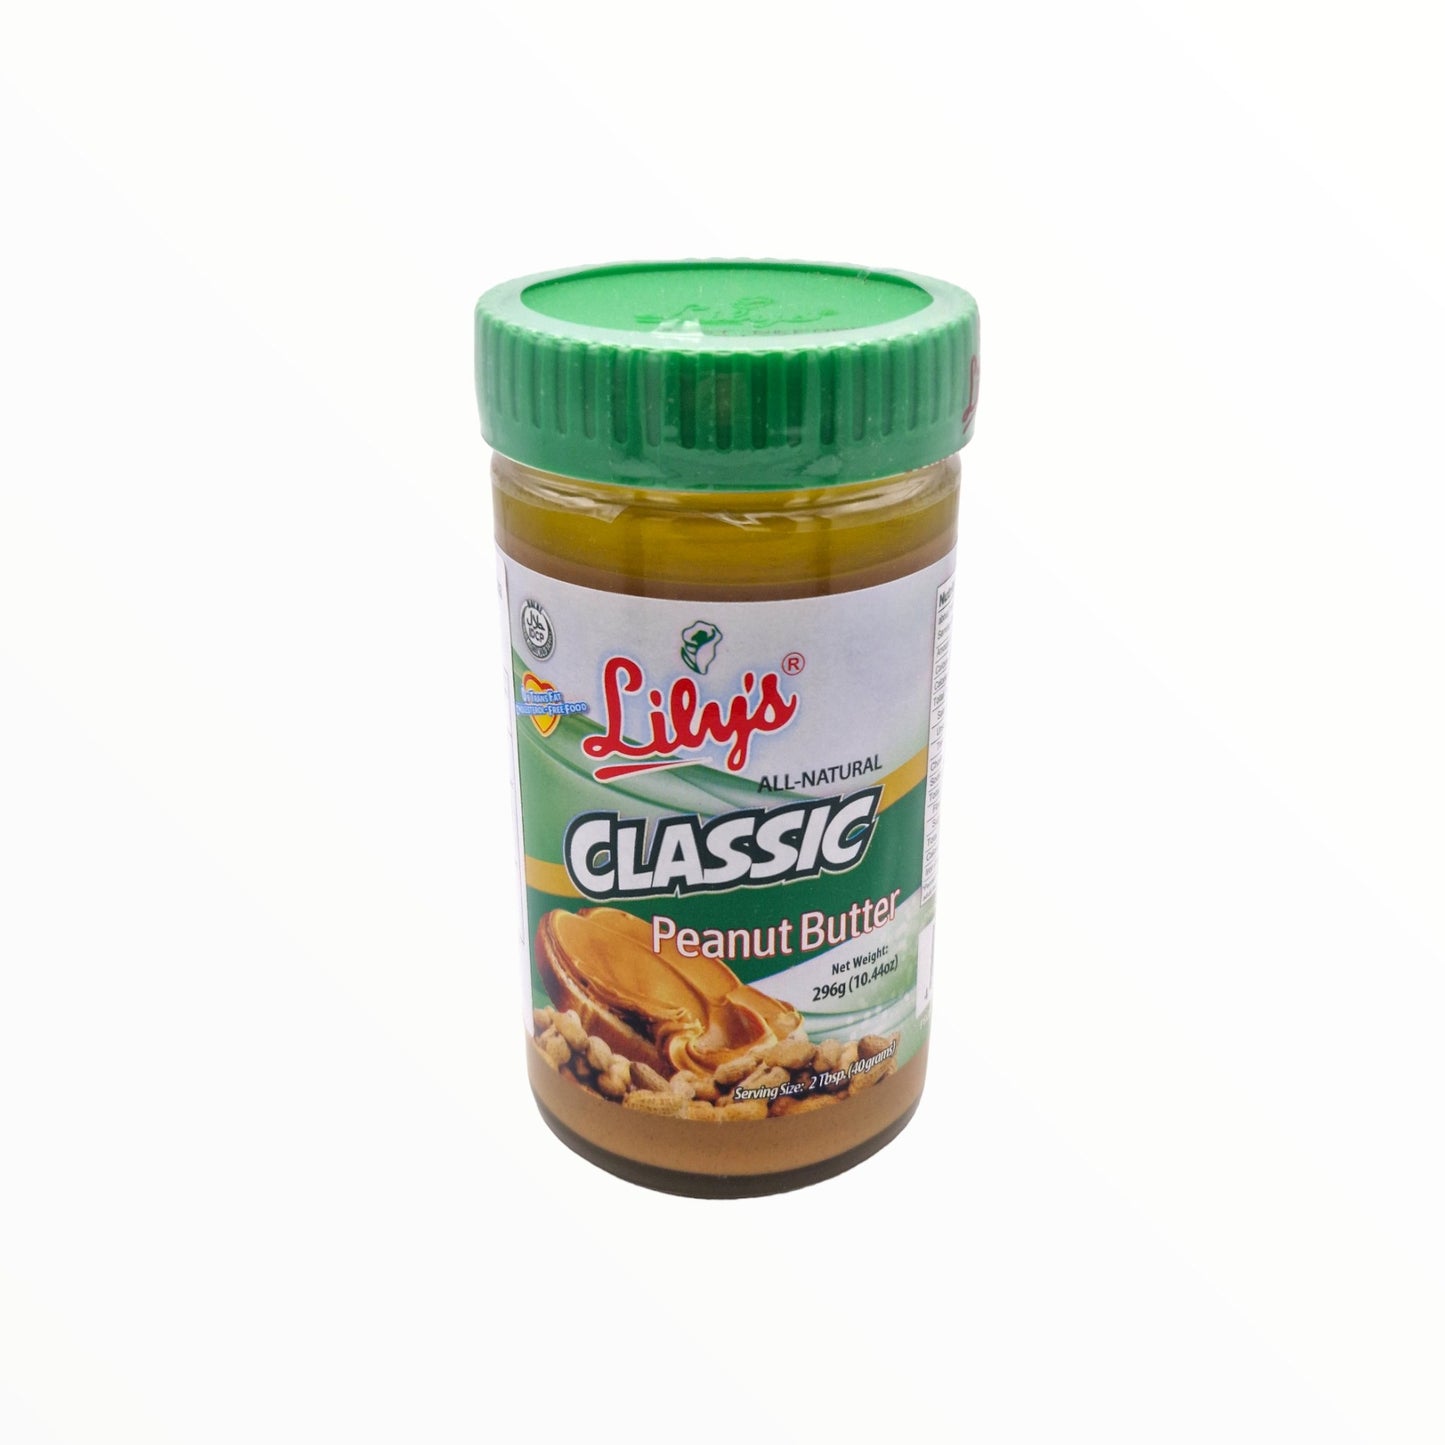 Classic Peanut Butter 296g - Mabuhay Pinoy Asia Shop